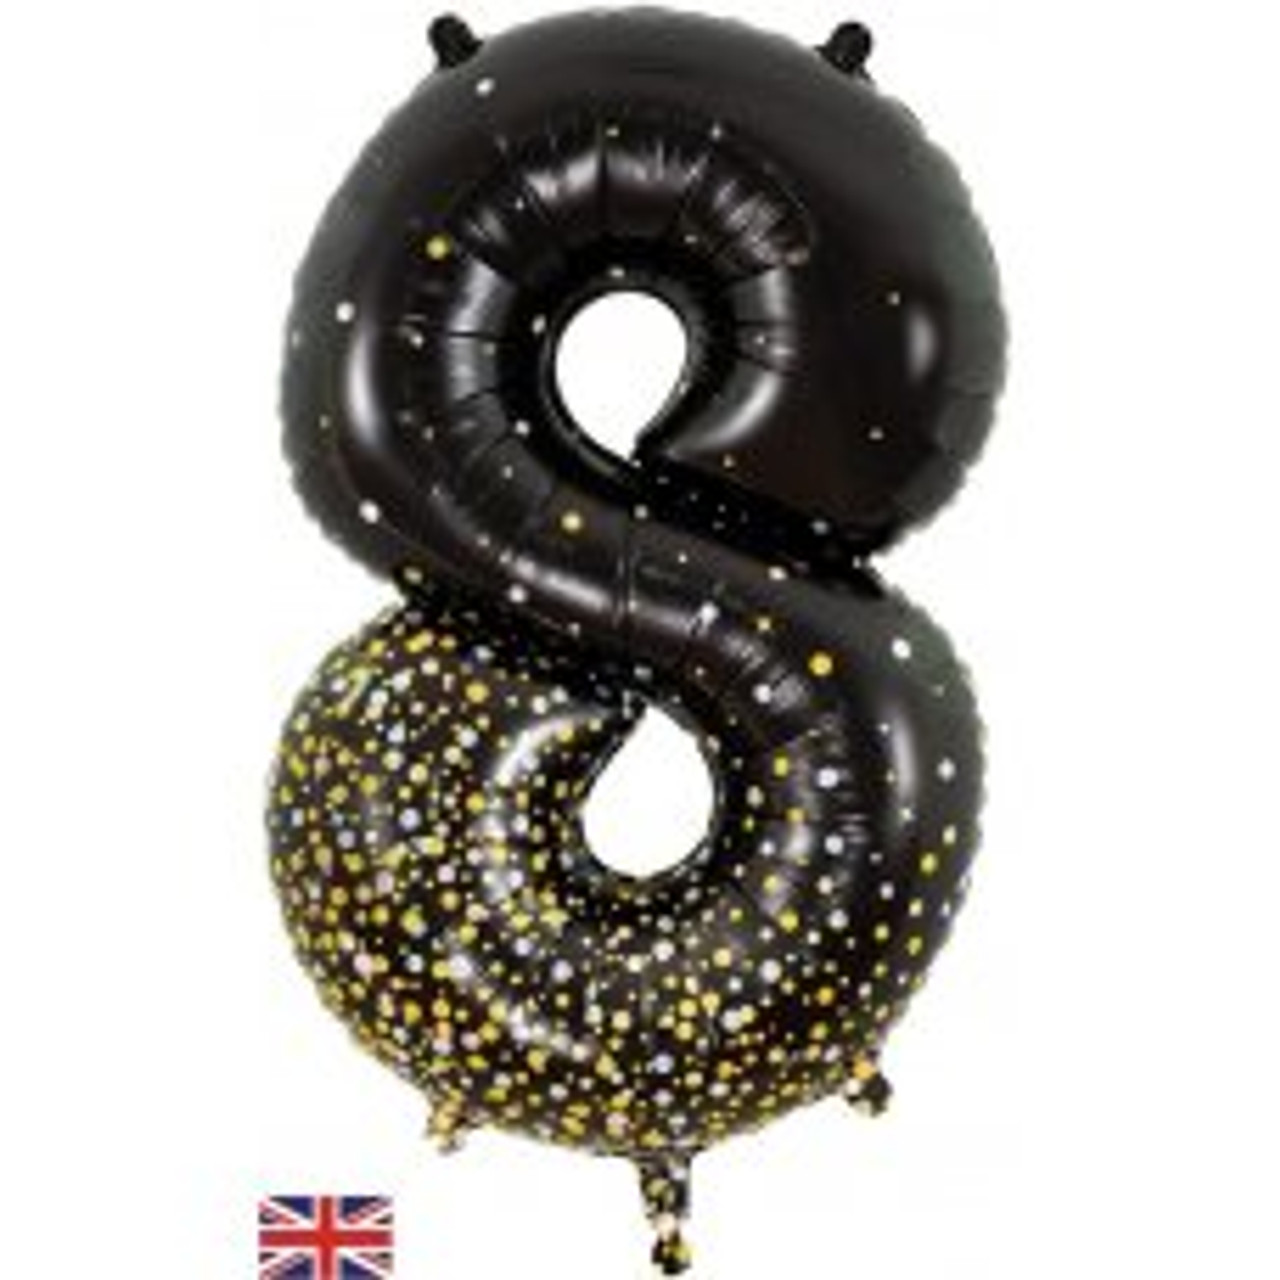 OT606982 NUMERAL SPARKLING FIZZ BLACK GOLD 8 FOIL BALLOON 87CM/34". HELIUM INFLATED, RIBBON AND WEIGHT